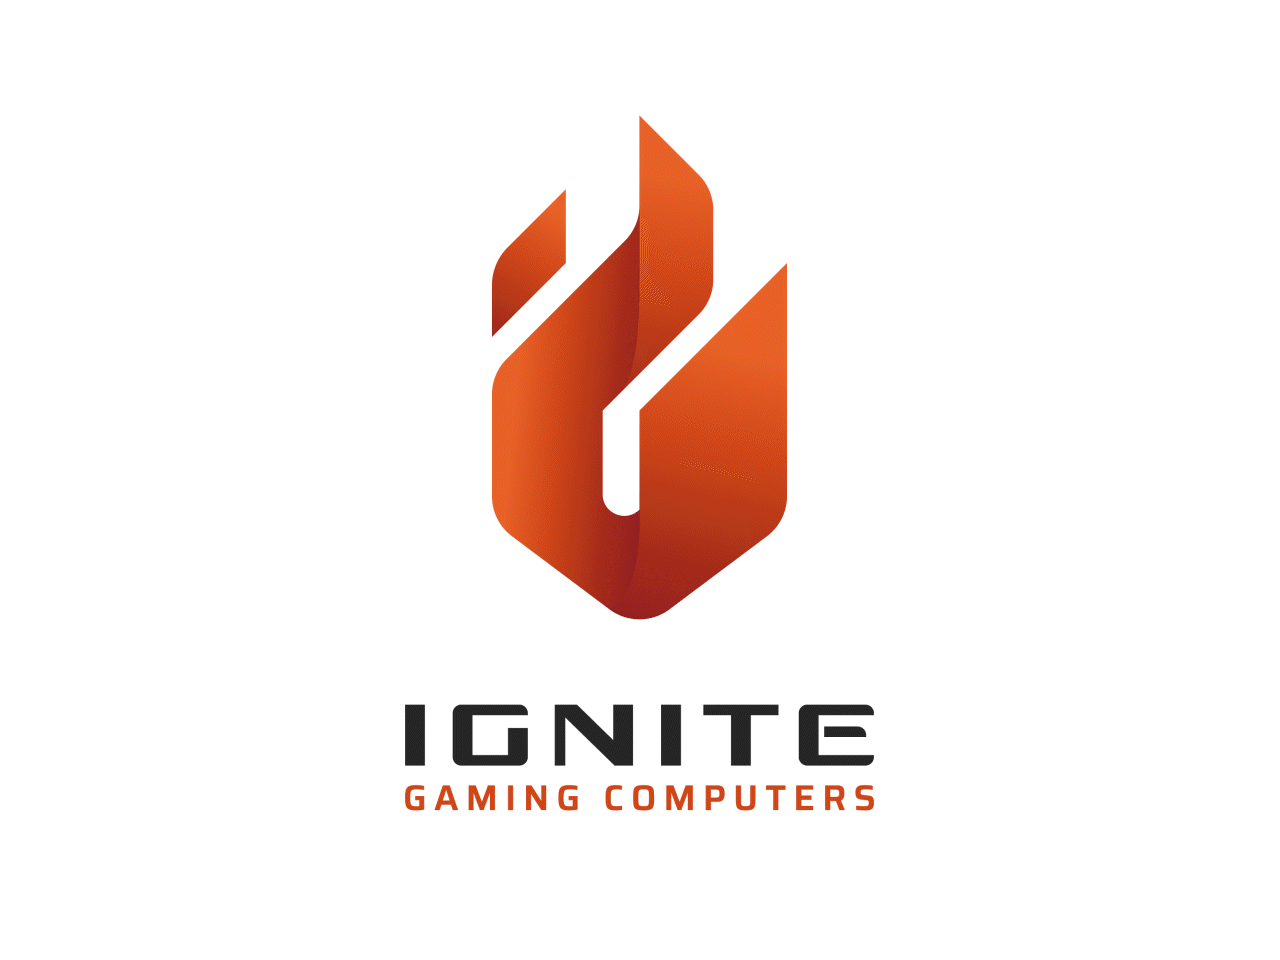 Ignite logo animation after effects animated logo animation computer retail fire gaming computers gaming pc ignite ignite gaming logo logo animation logoanimation pc retailer